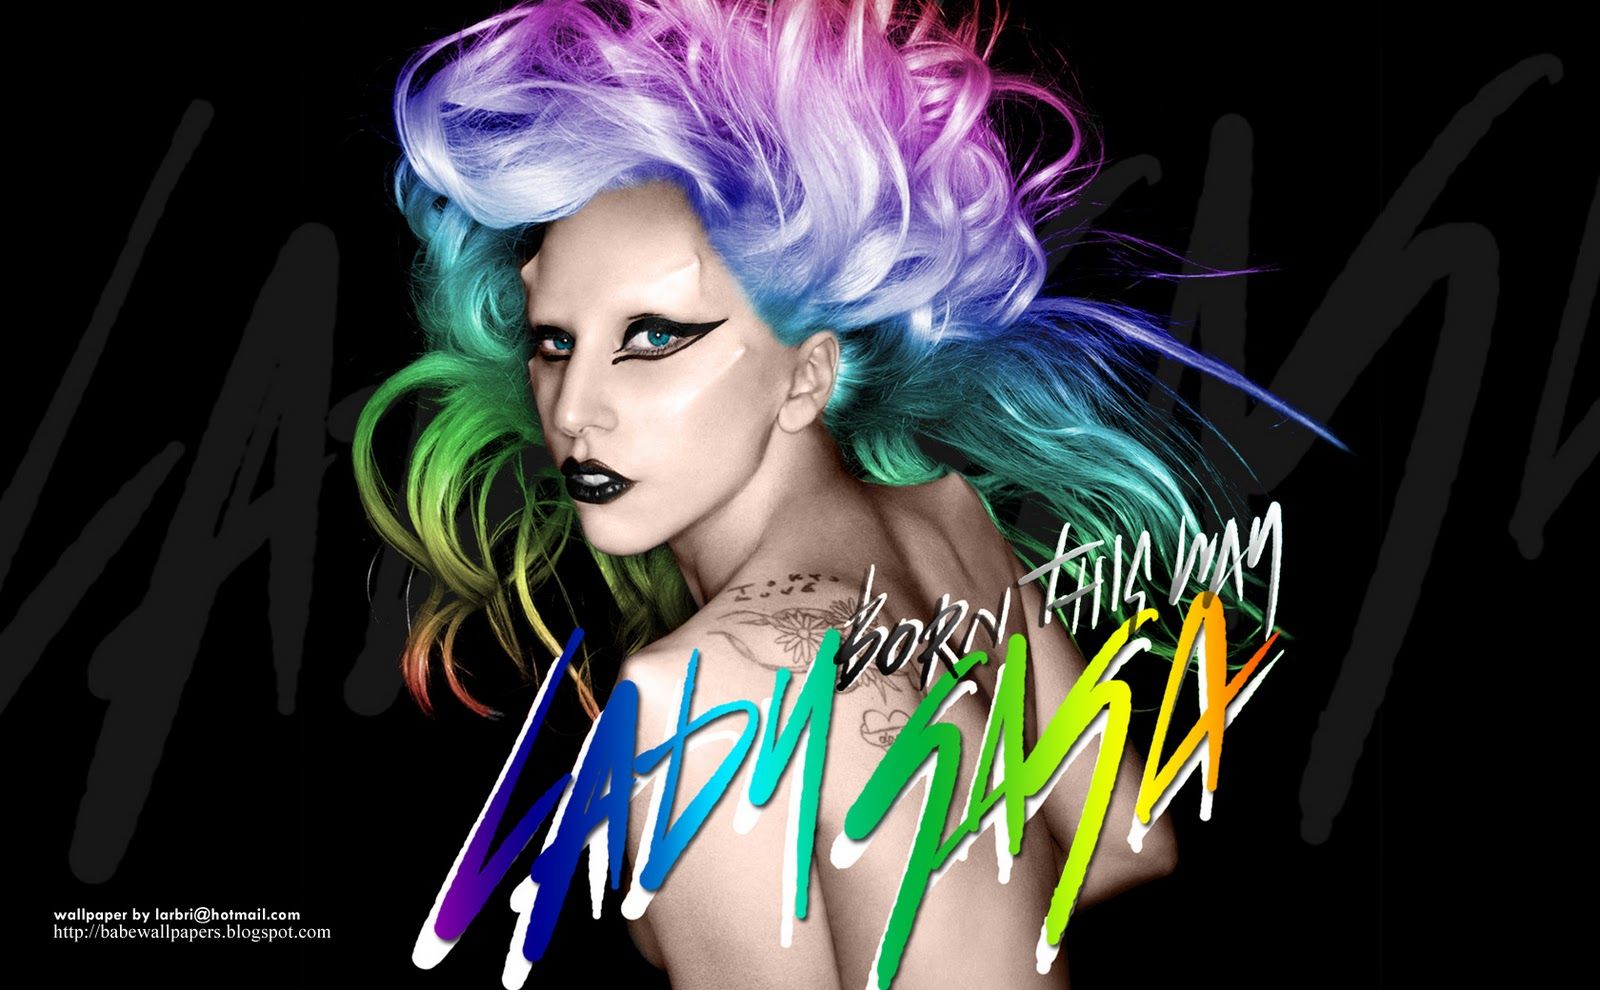 1600x990 Free Download Babe Wallpaper Lady Gaga Born This Way Widescreen Wallpaper 3 1600x990 For Your Desktop Mobile Tablet Explore Home Wallpaper My Way How To Change Google Wallpaper